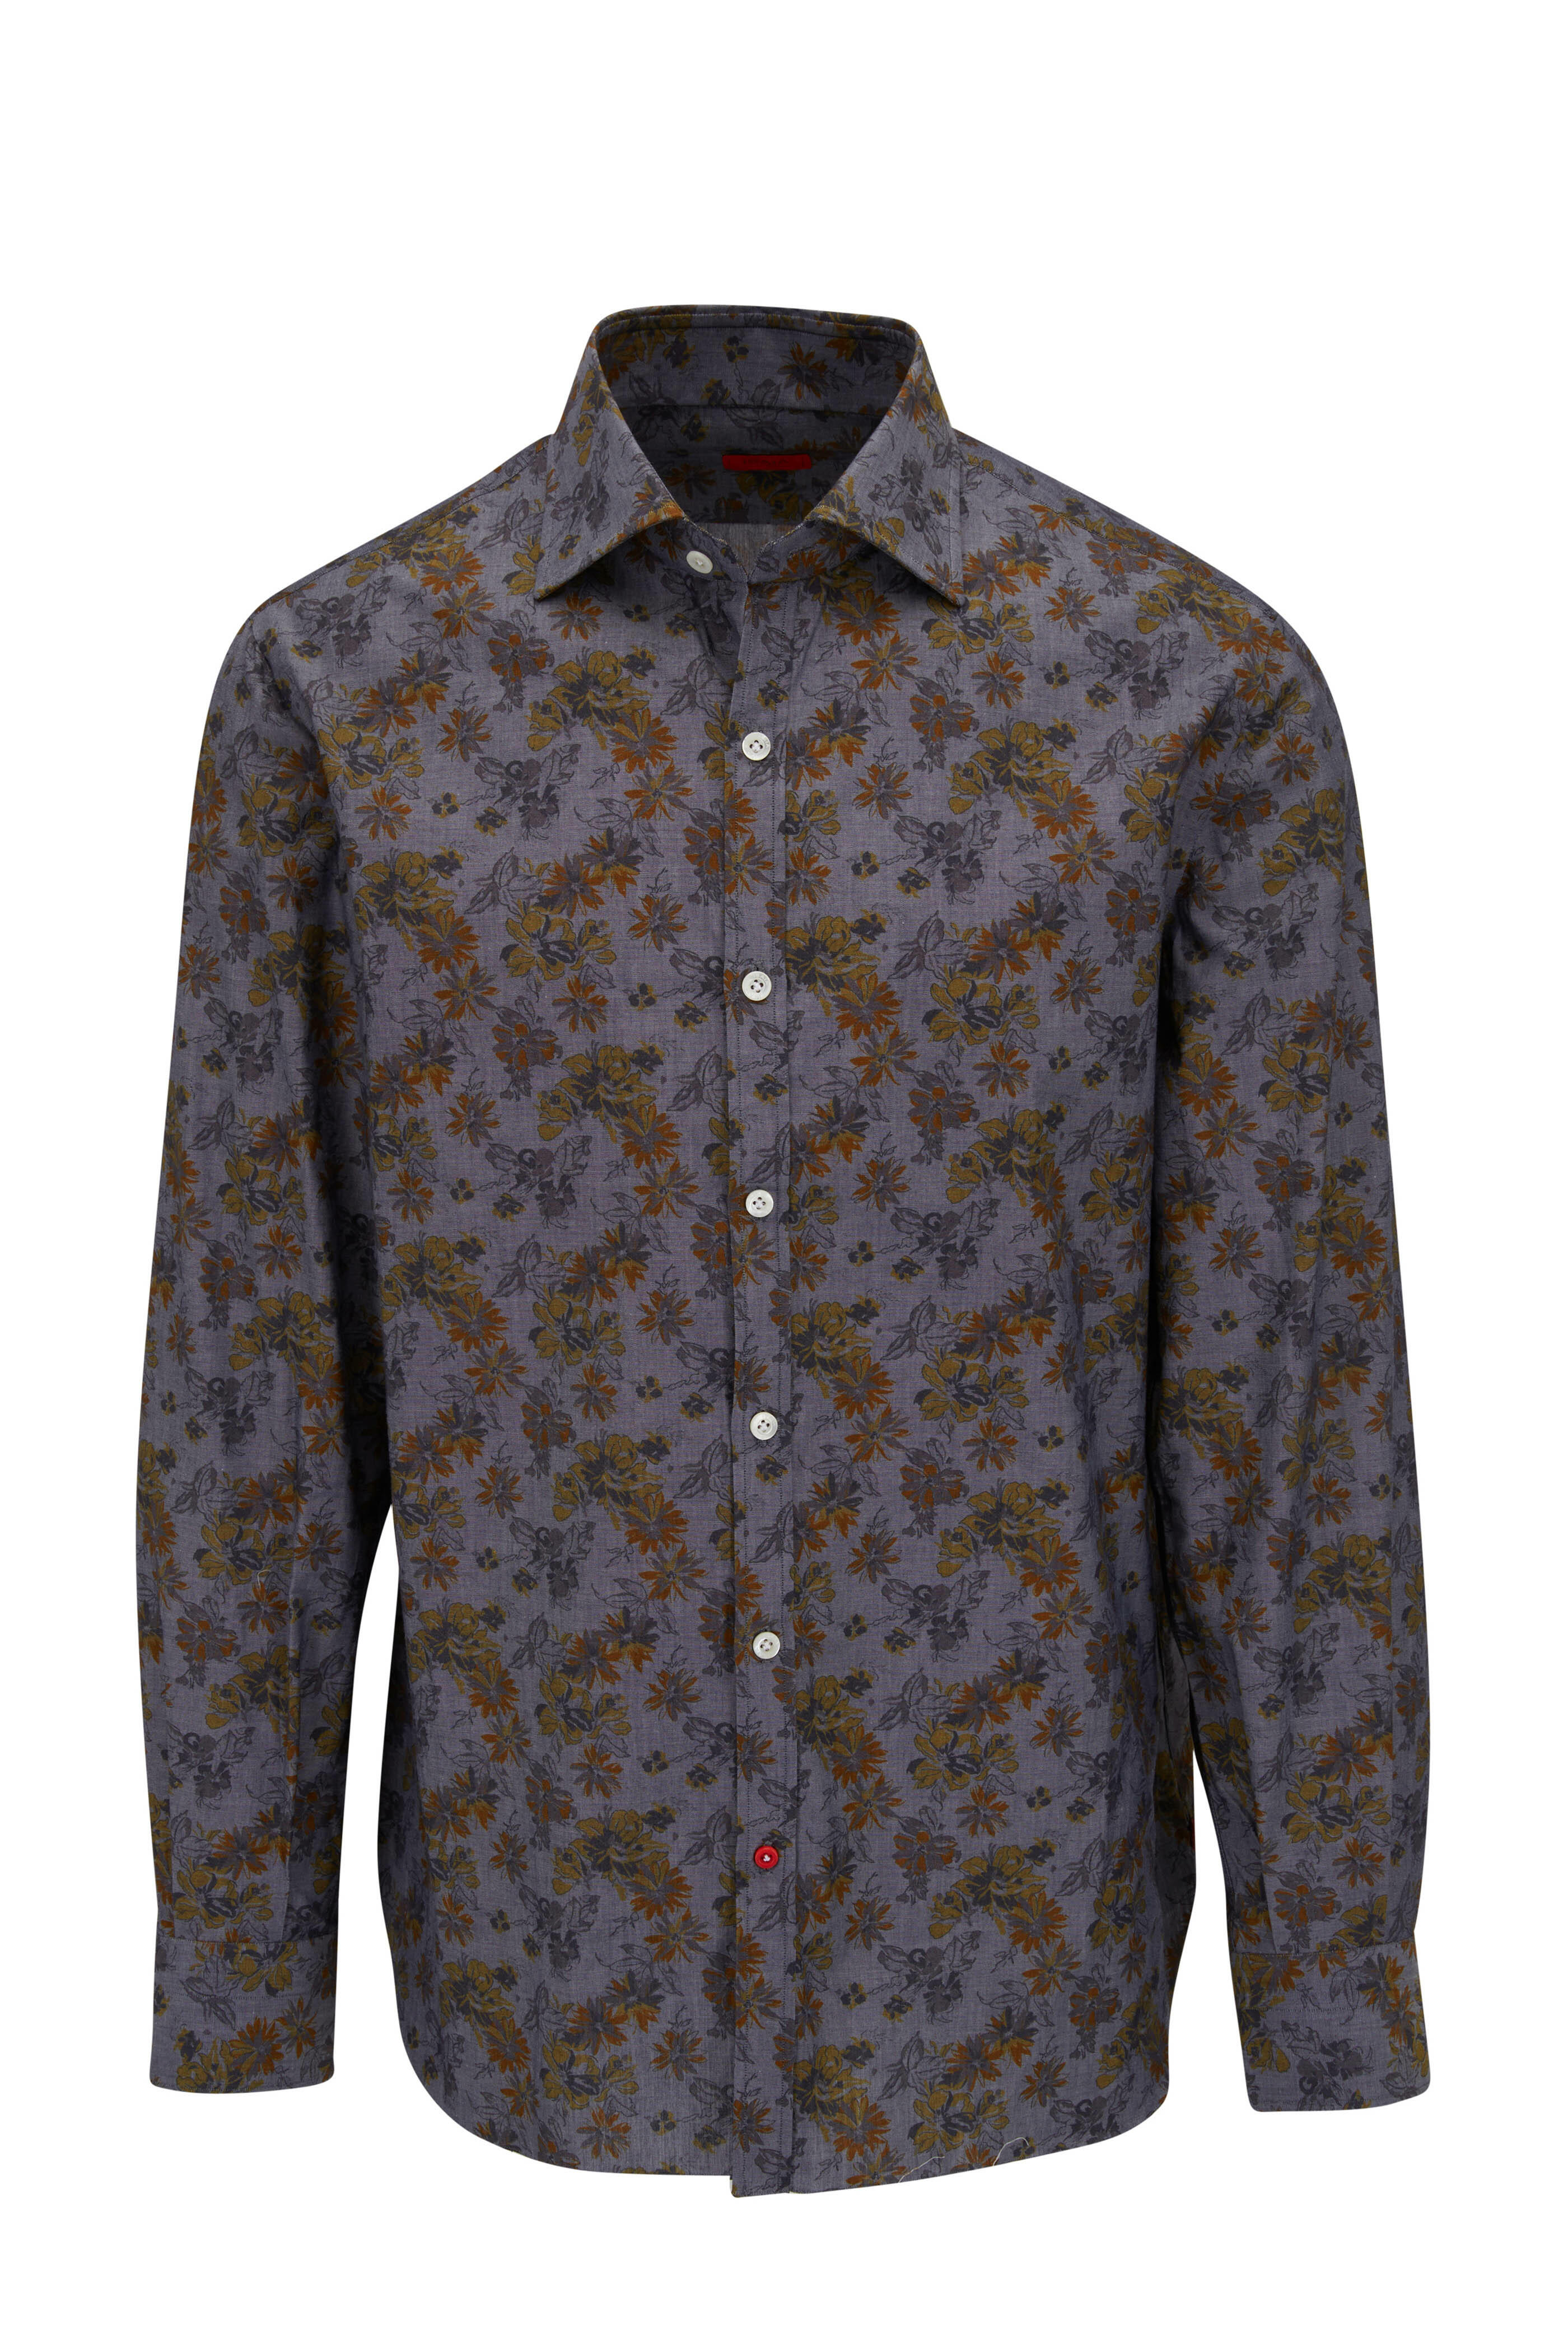 Isaia - Gray Floral Chambray Denim Sport Shirt | Mitchell Stores